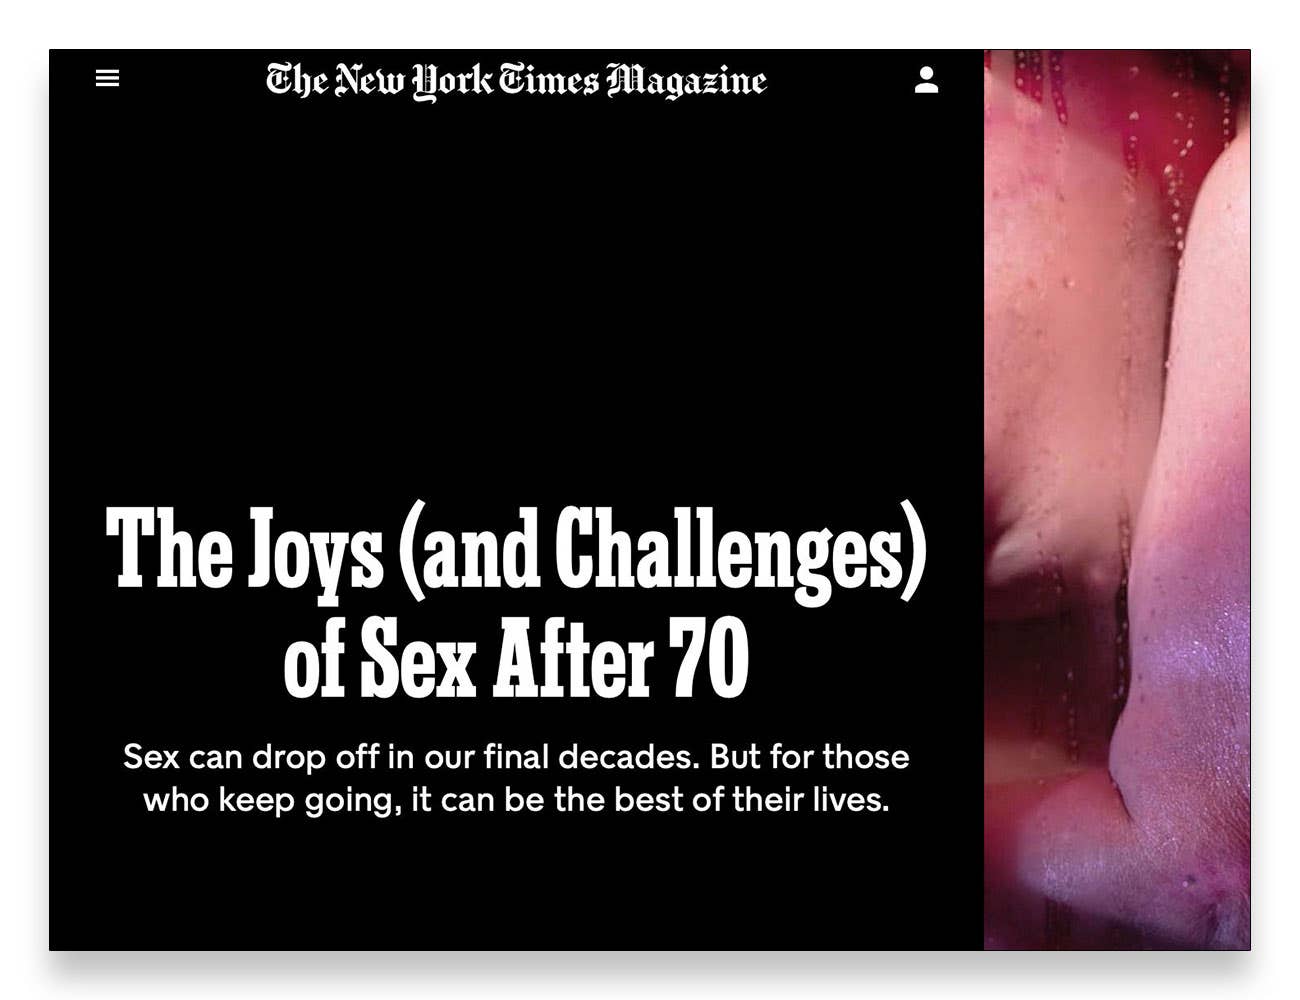 New York Times - The Joys (and Challenges) of Sex After 70